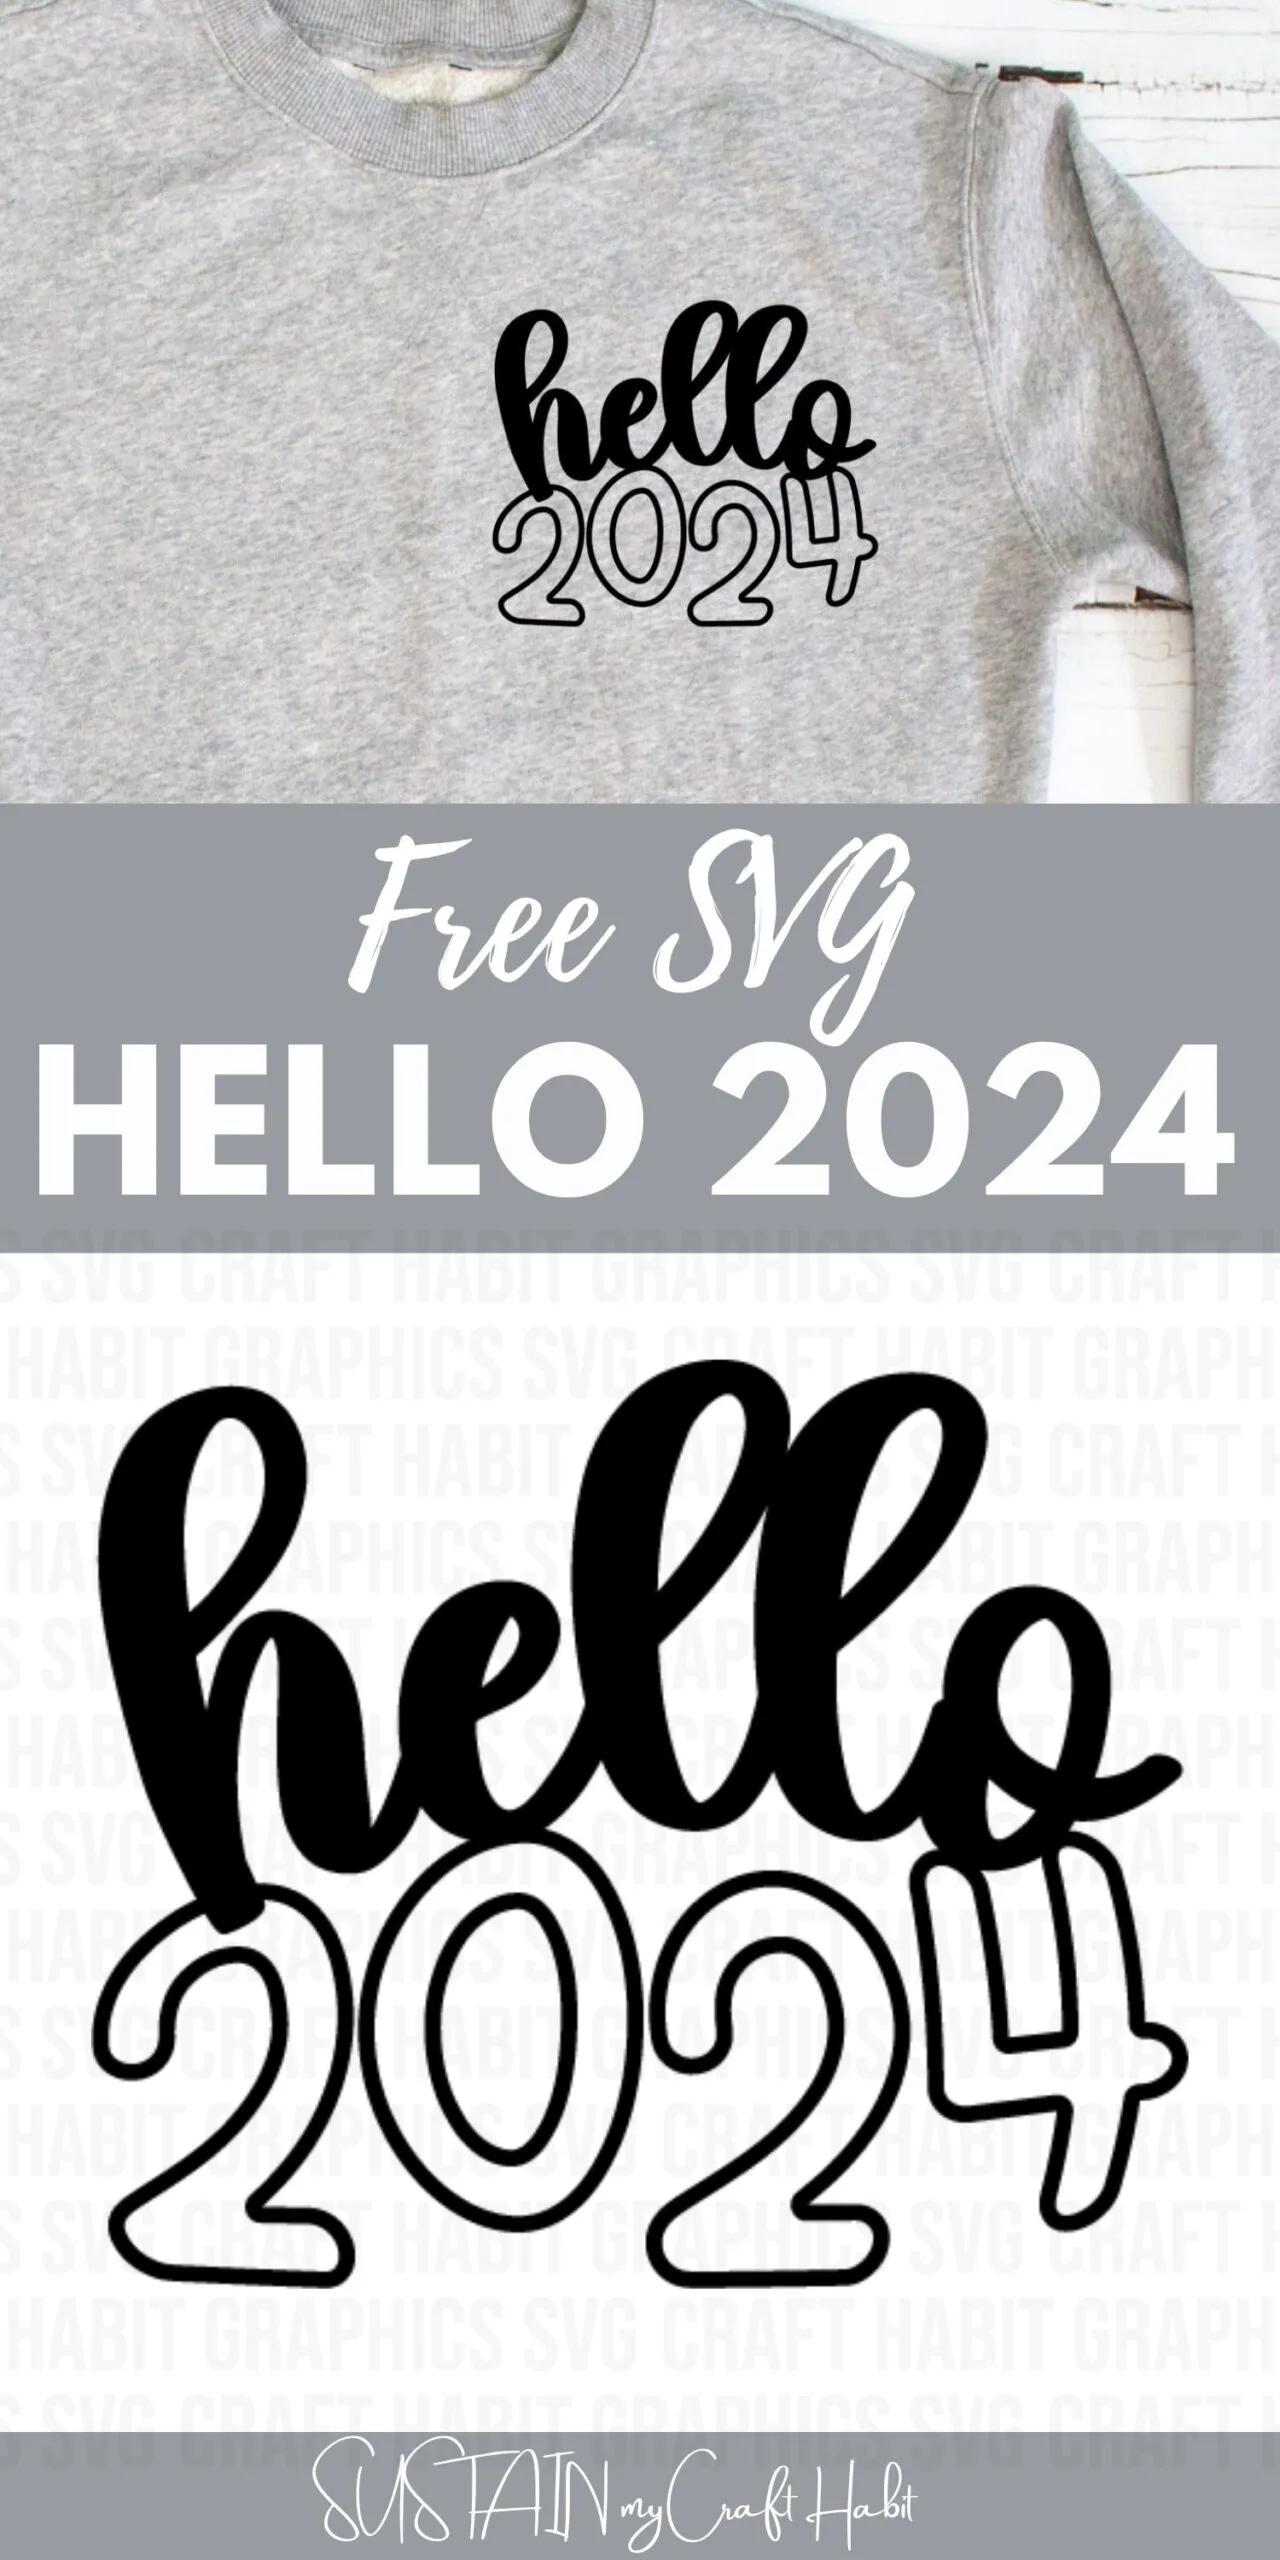 Collage of images showing a sweatshirt with the New Year SVG design that says hello 2024.